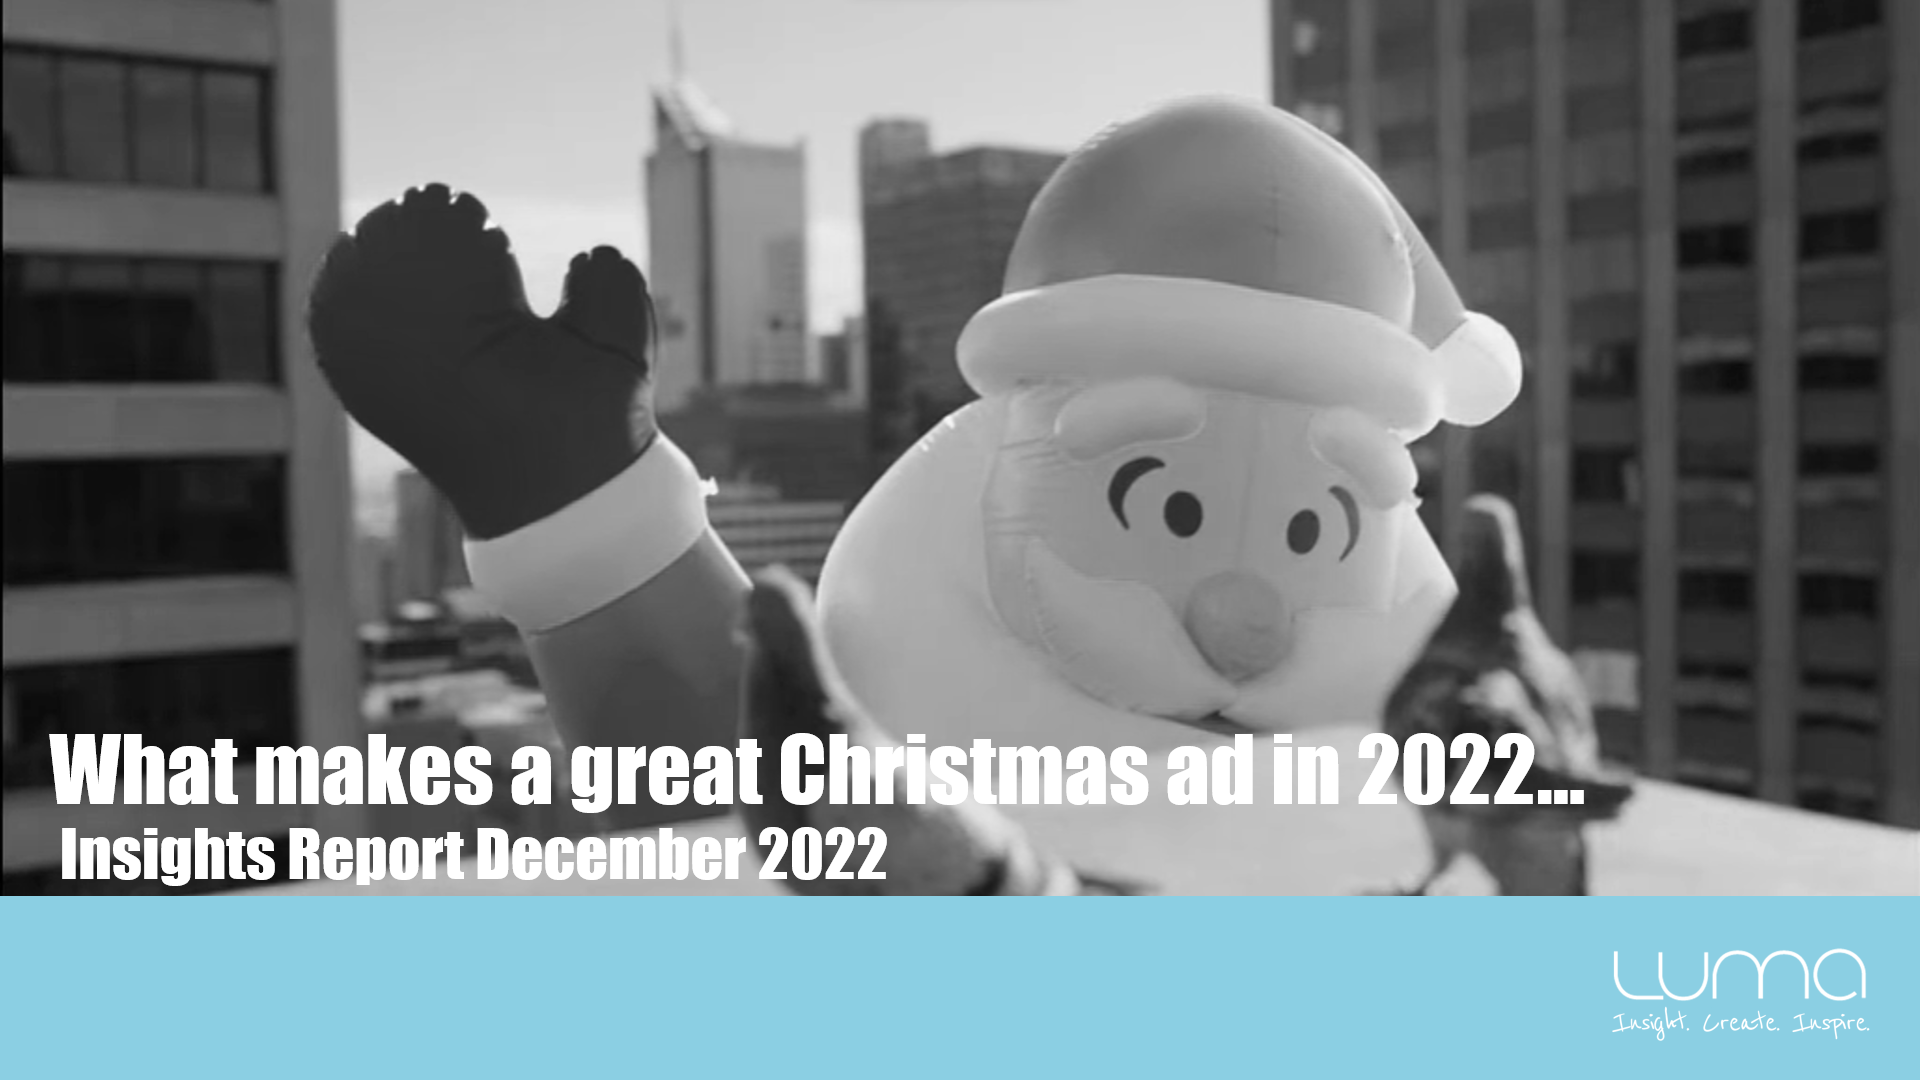 What makes a great Christmas ad in 2022...